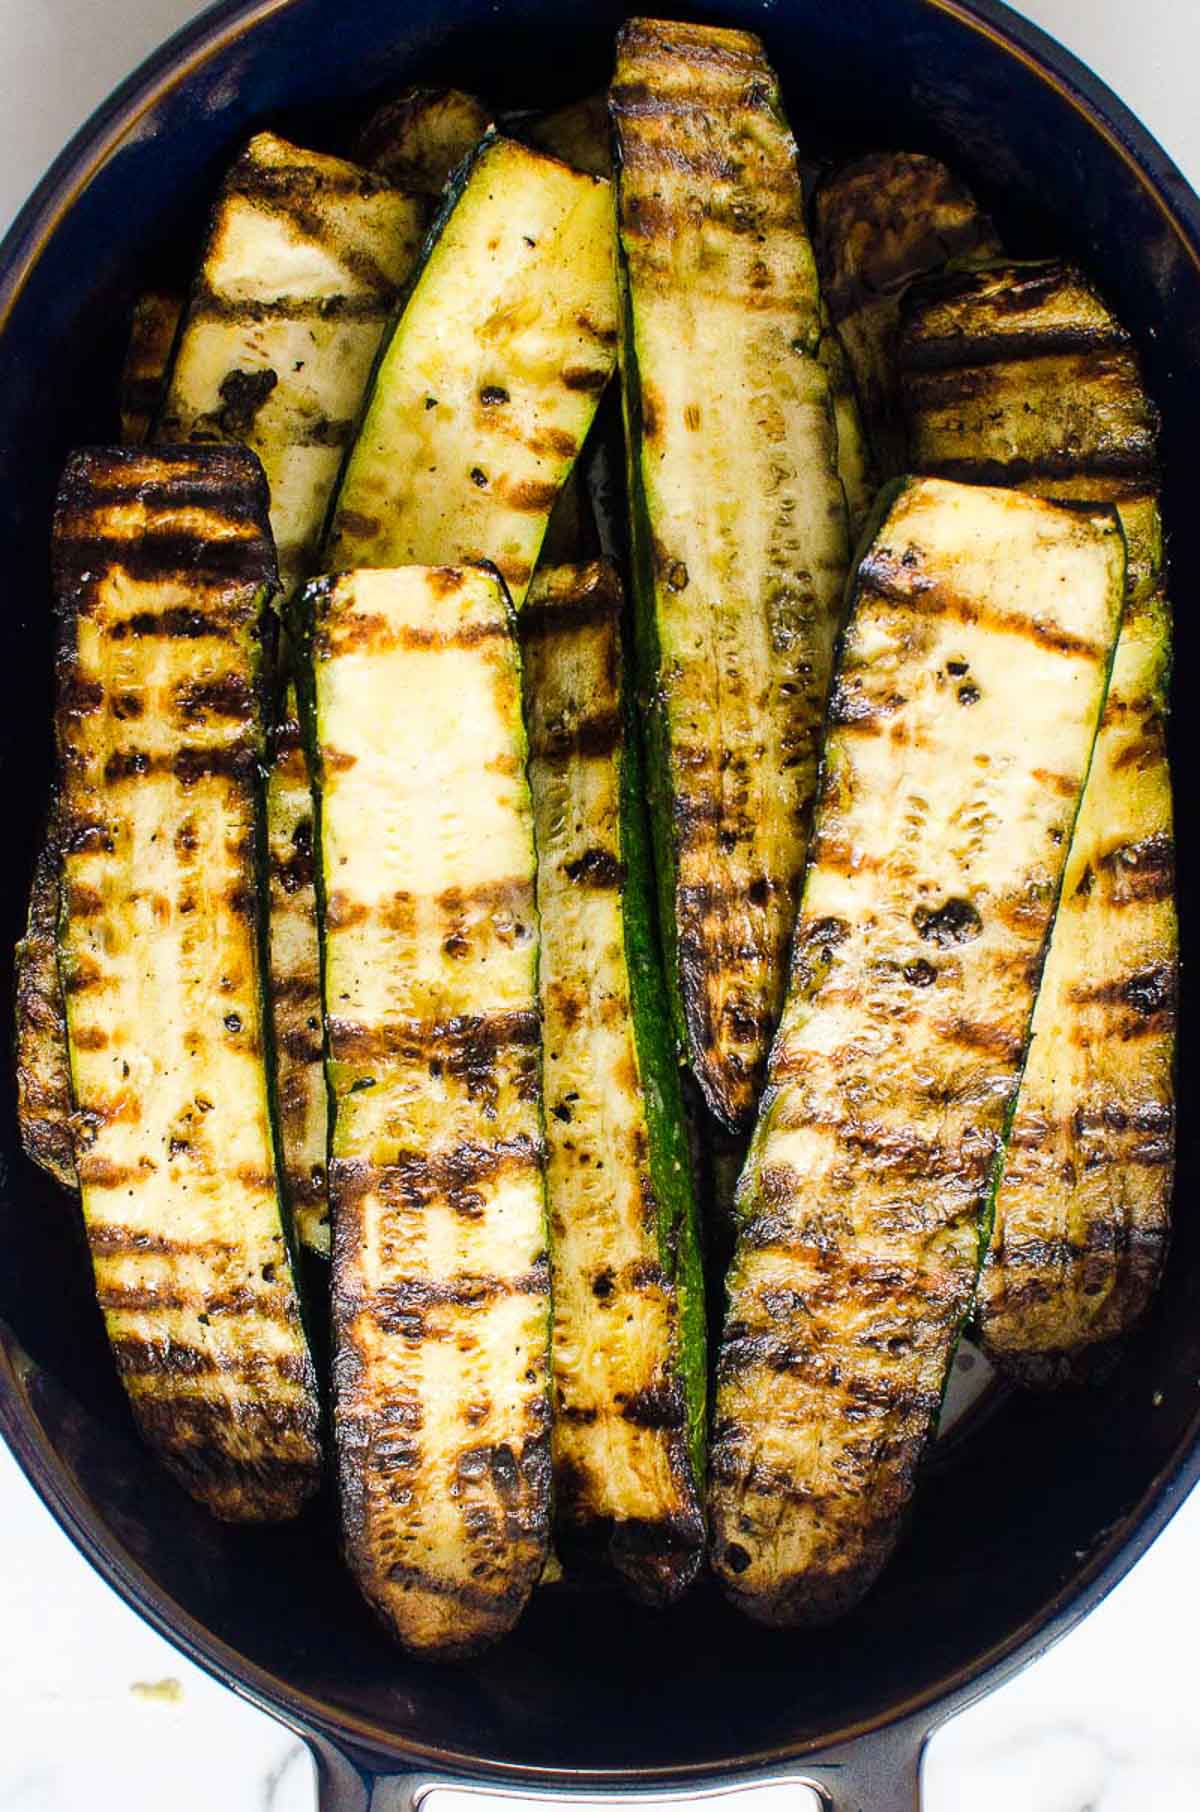 Grilled zucchini planks on top of each other in a dish.